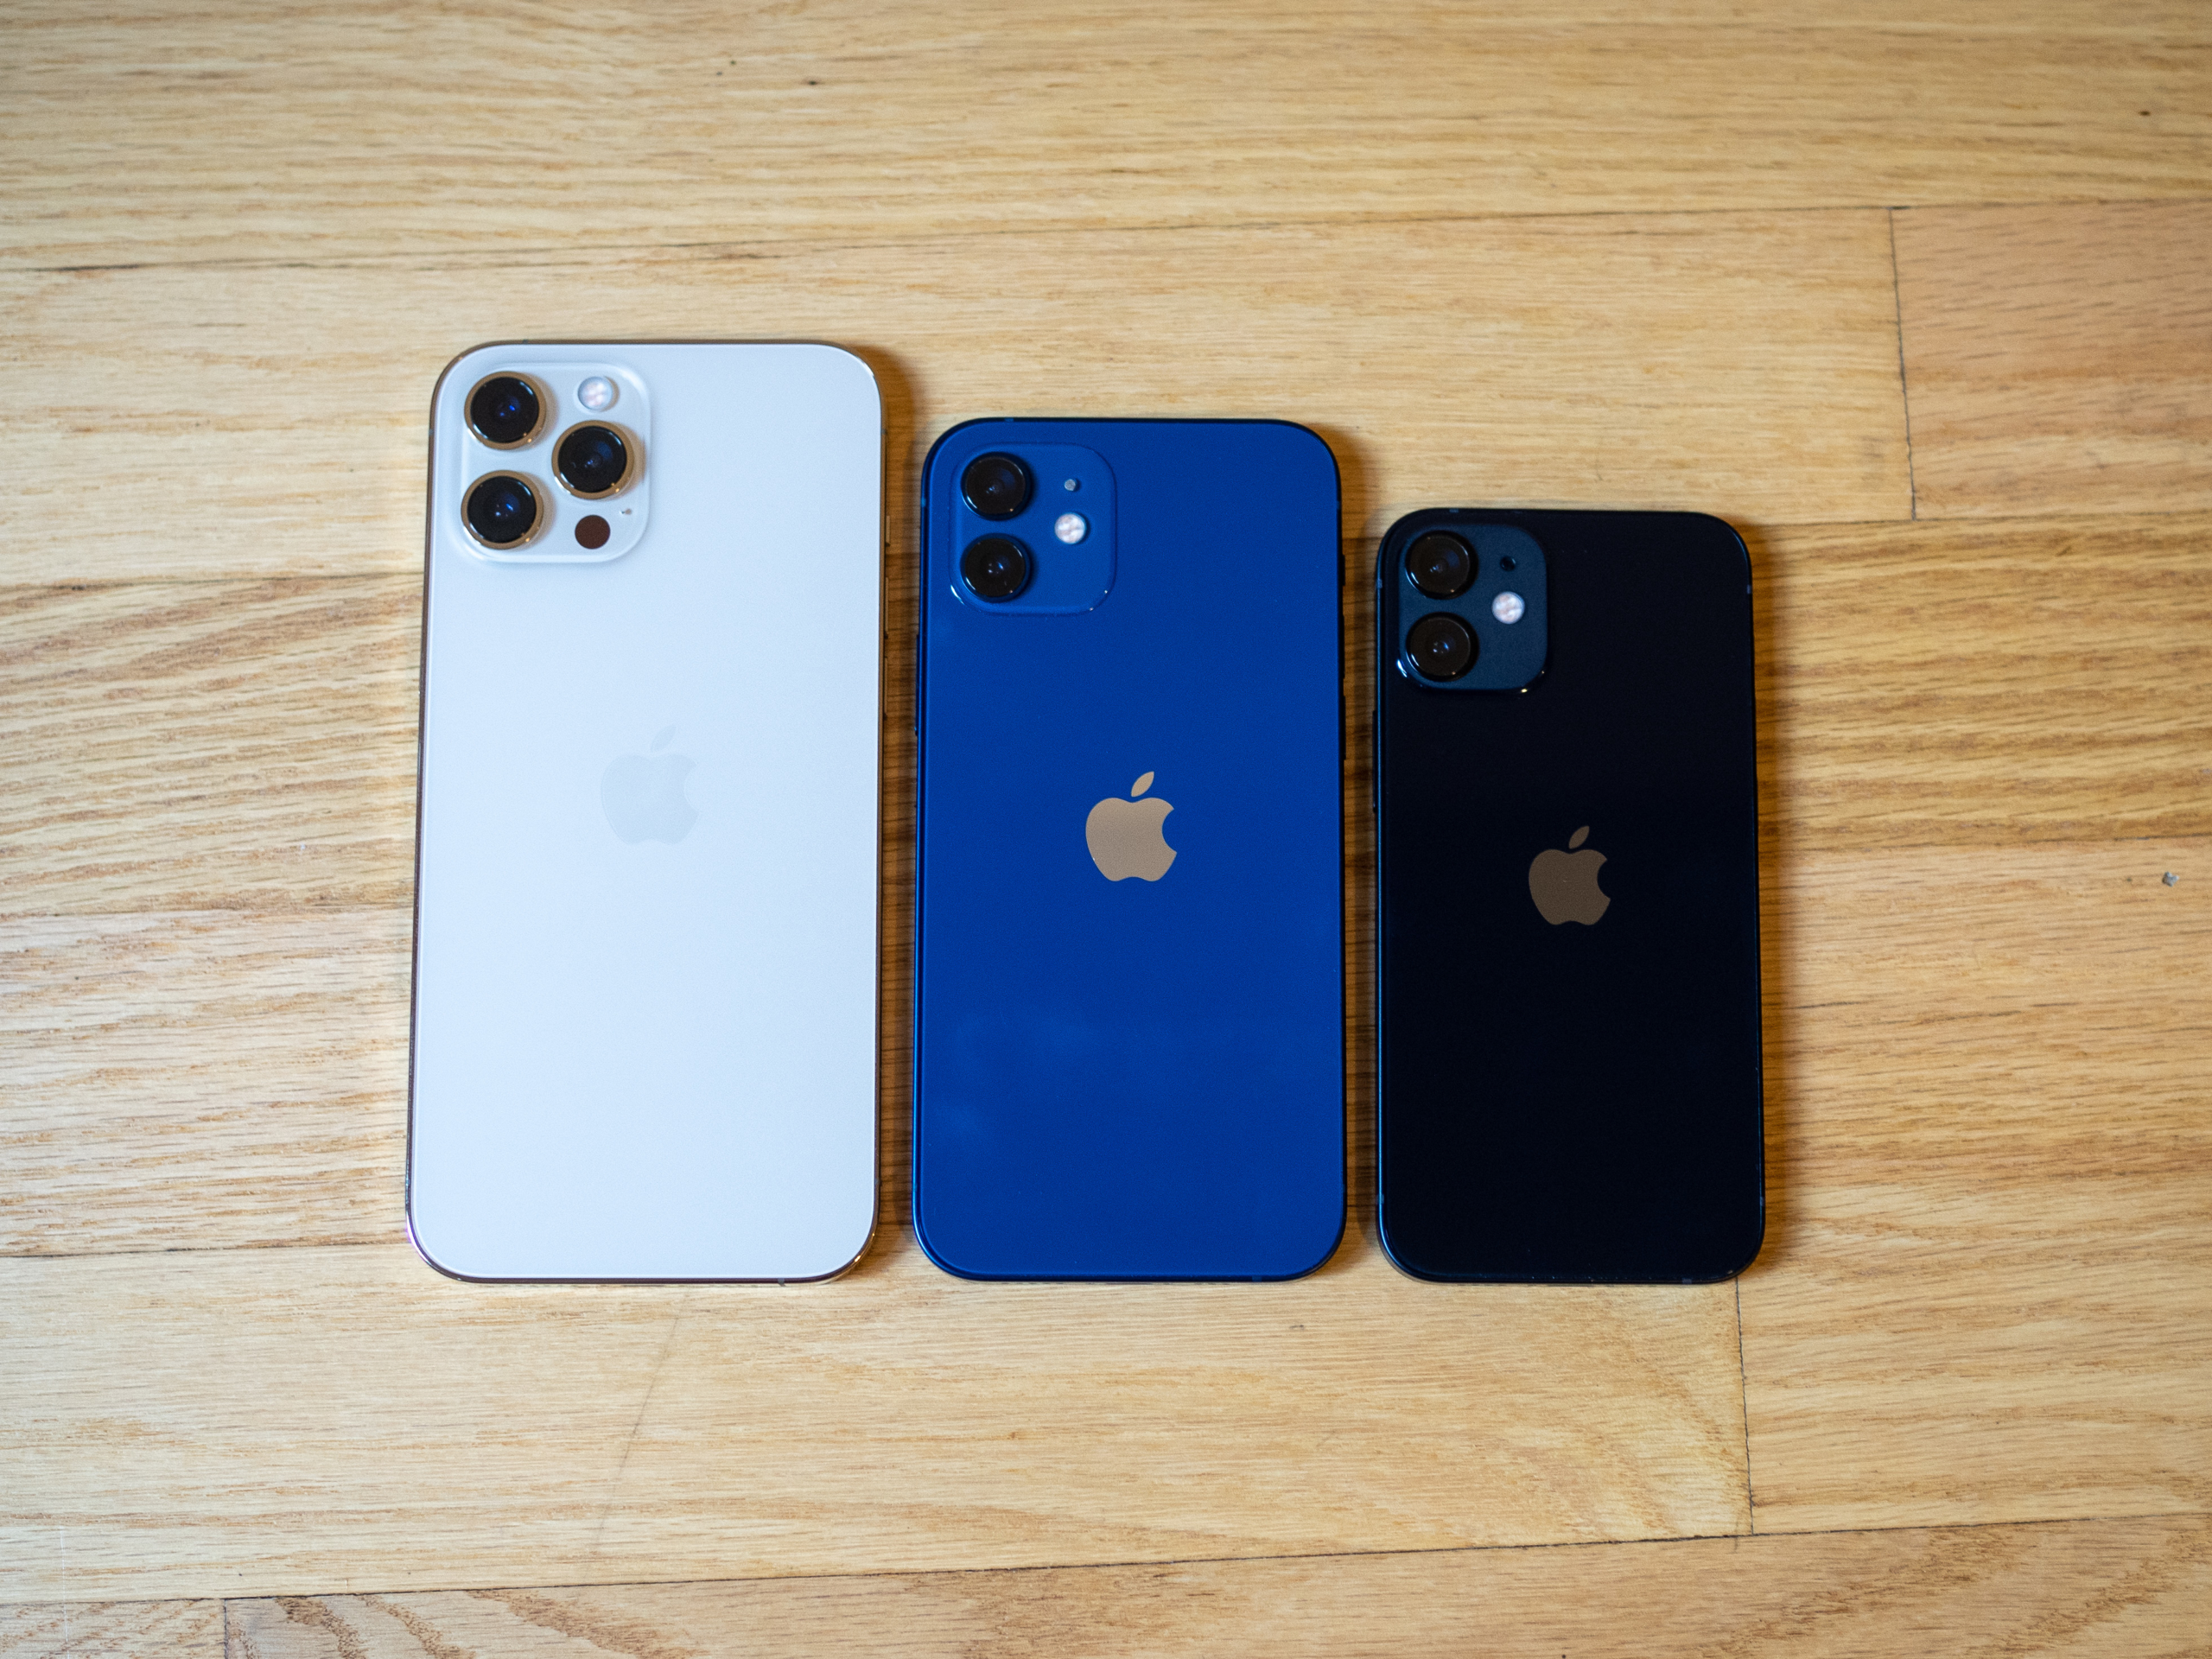 Apple iPhone 12 Pro Max review: Shootout with iPhone 12 Pro